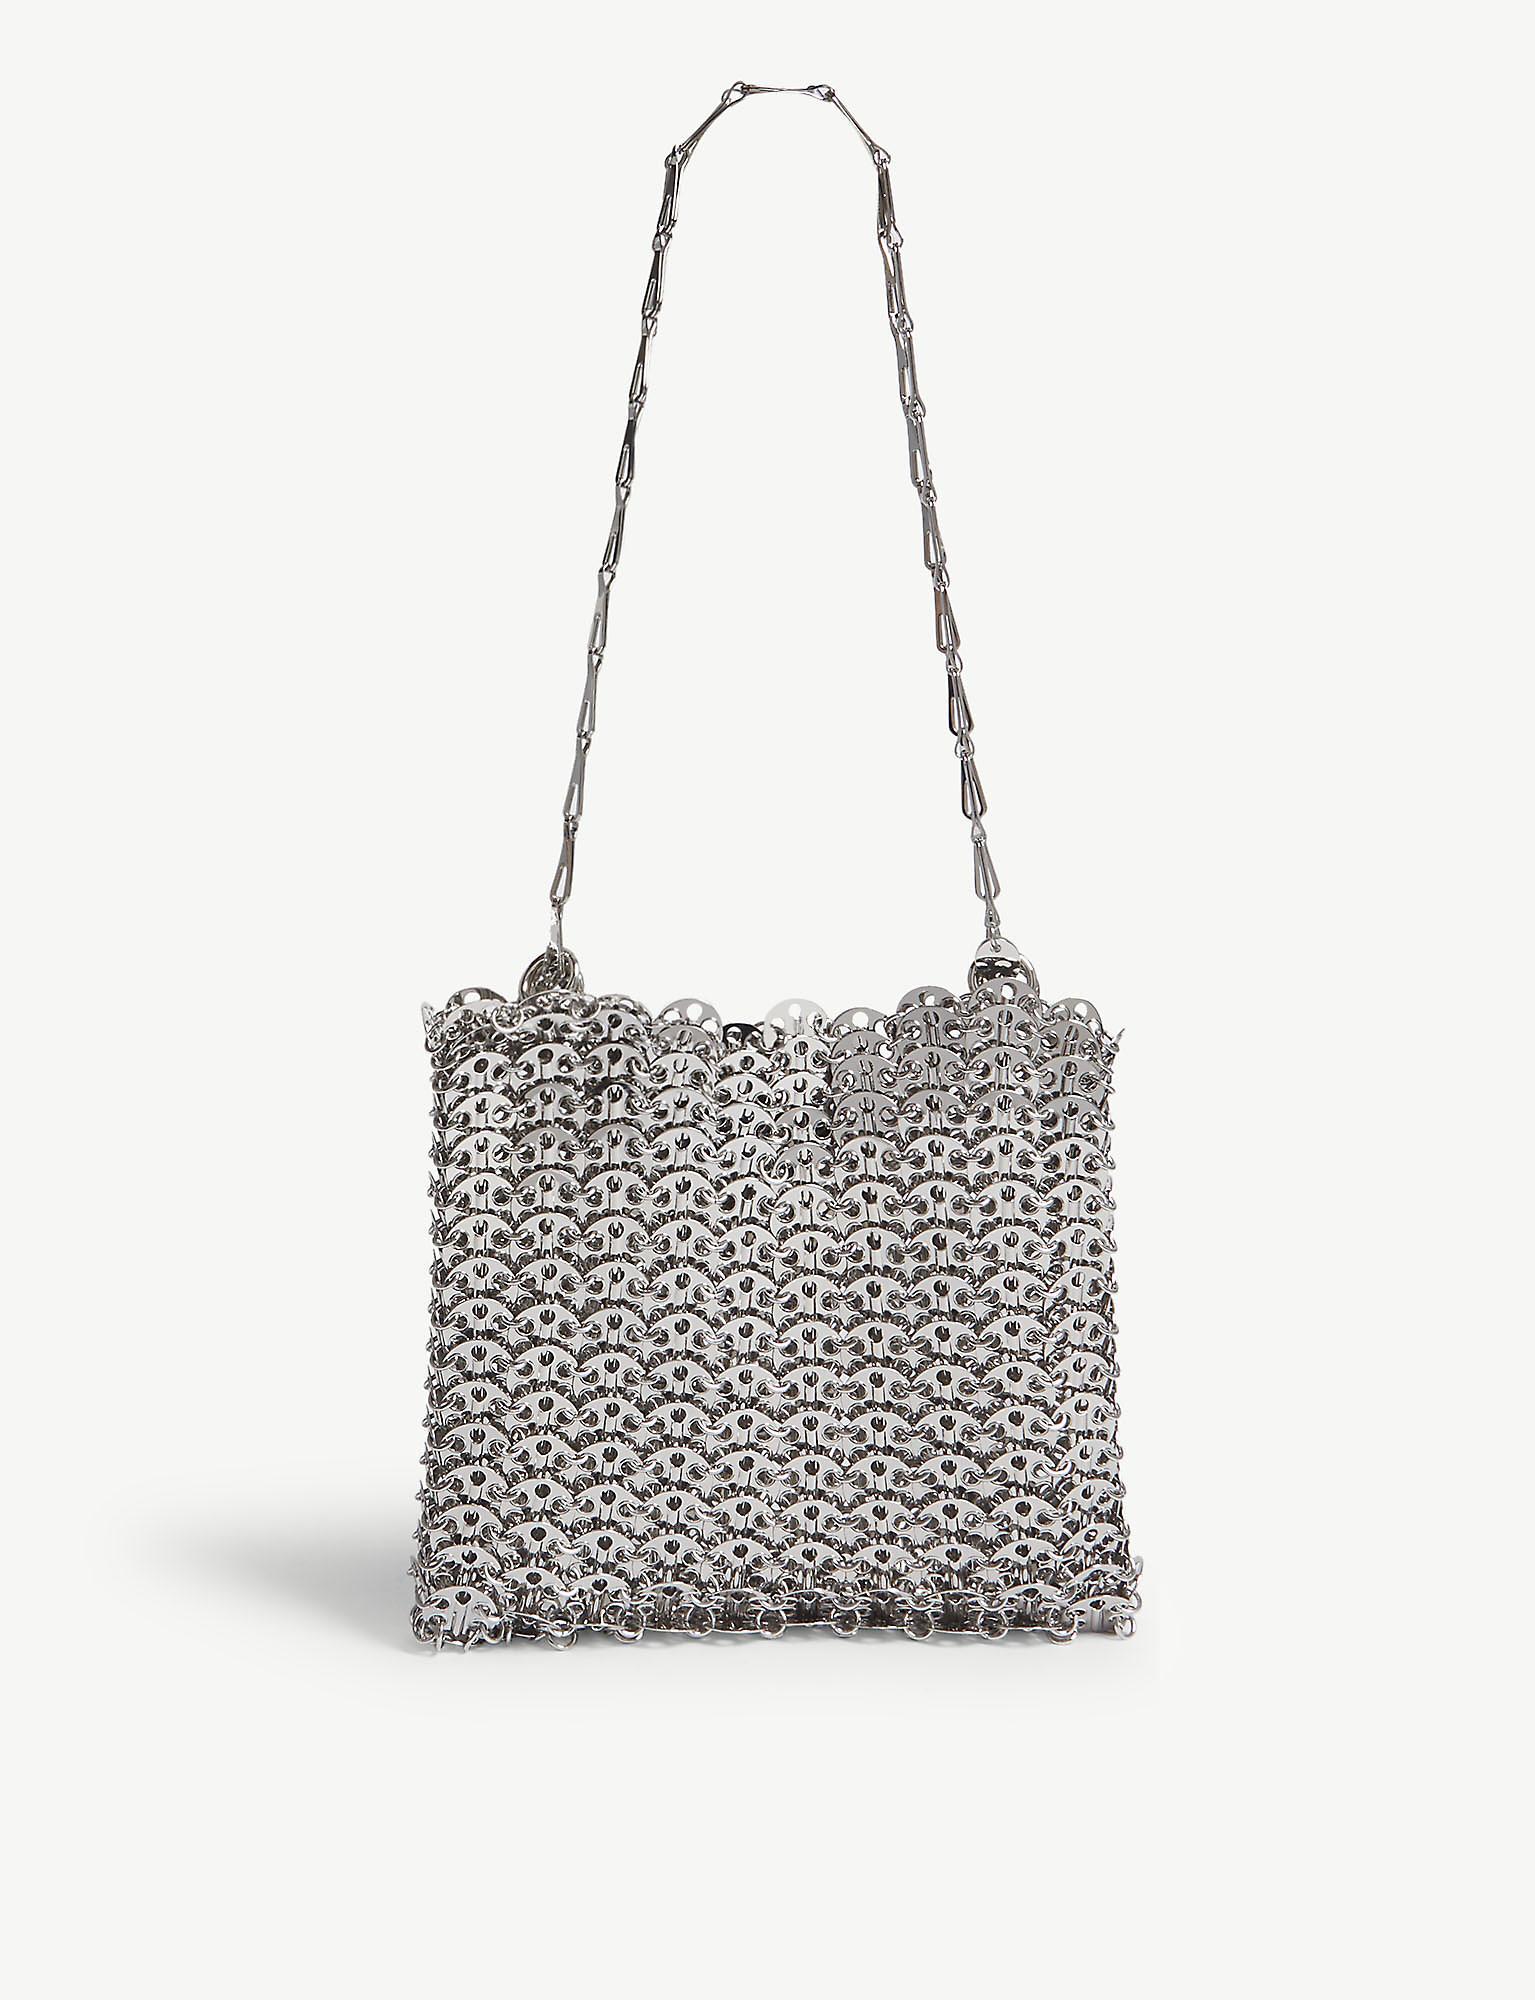 Paco Rabanne Iconic Chain Shoulder Bag in Silver (Metallic) - Lyst